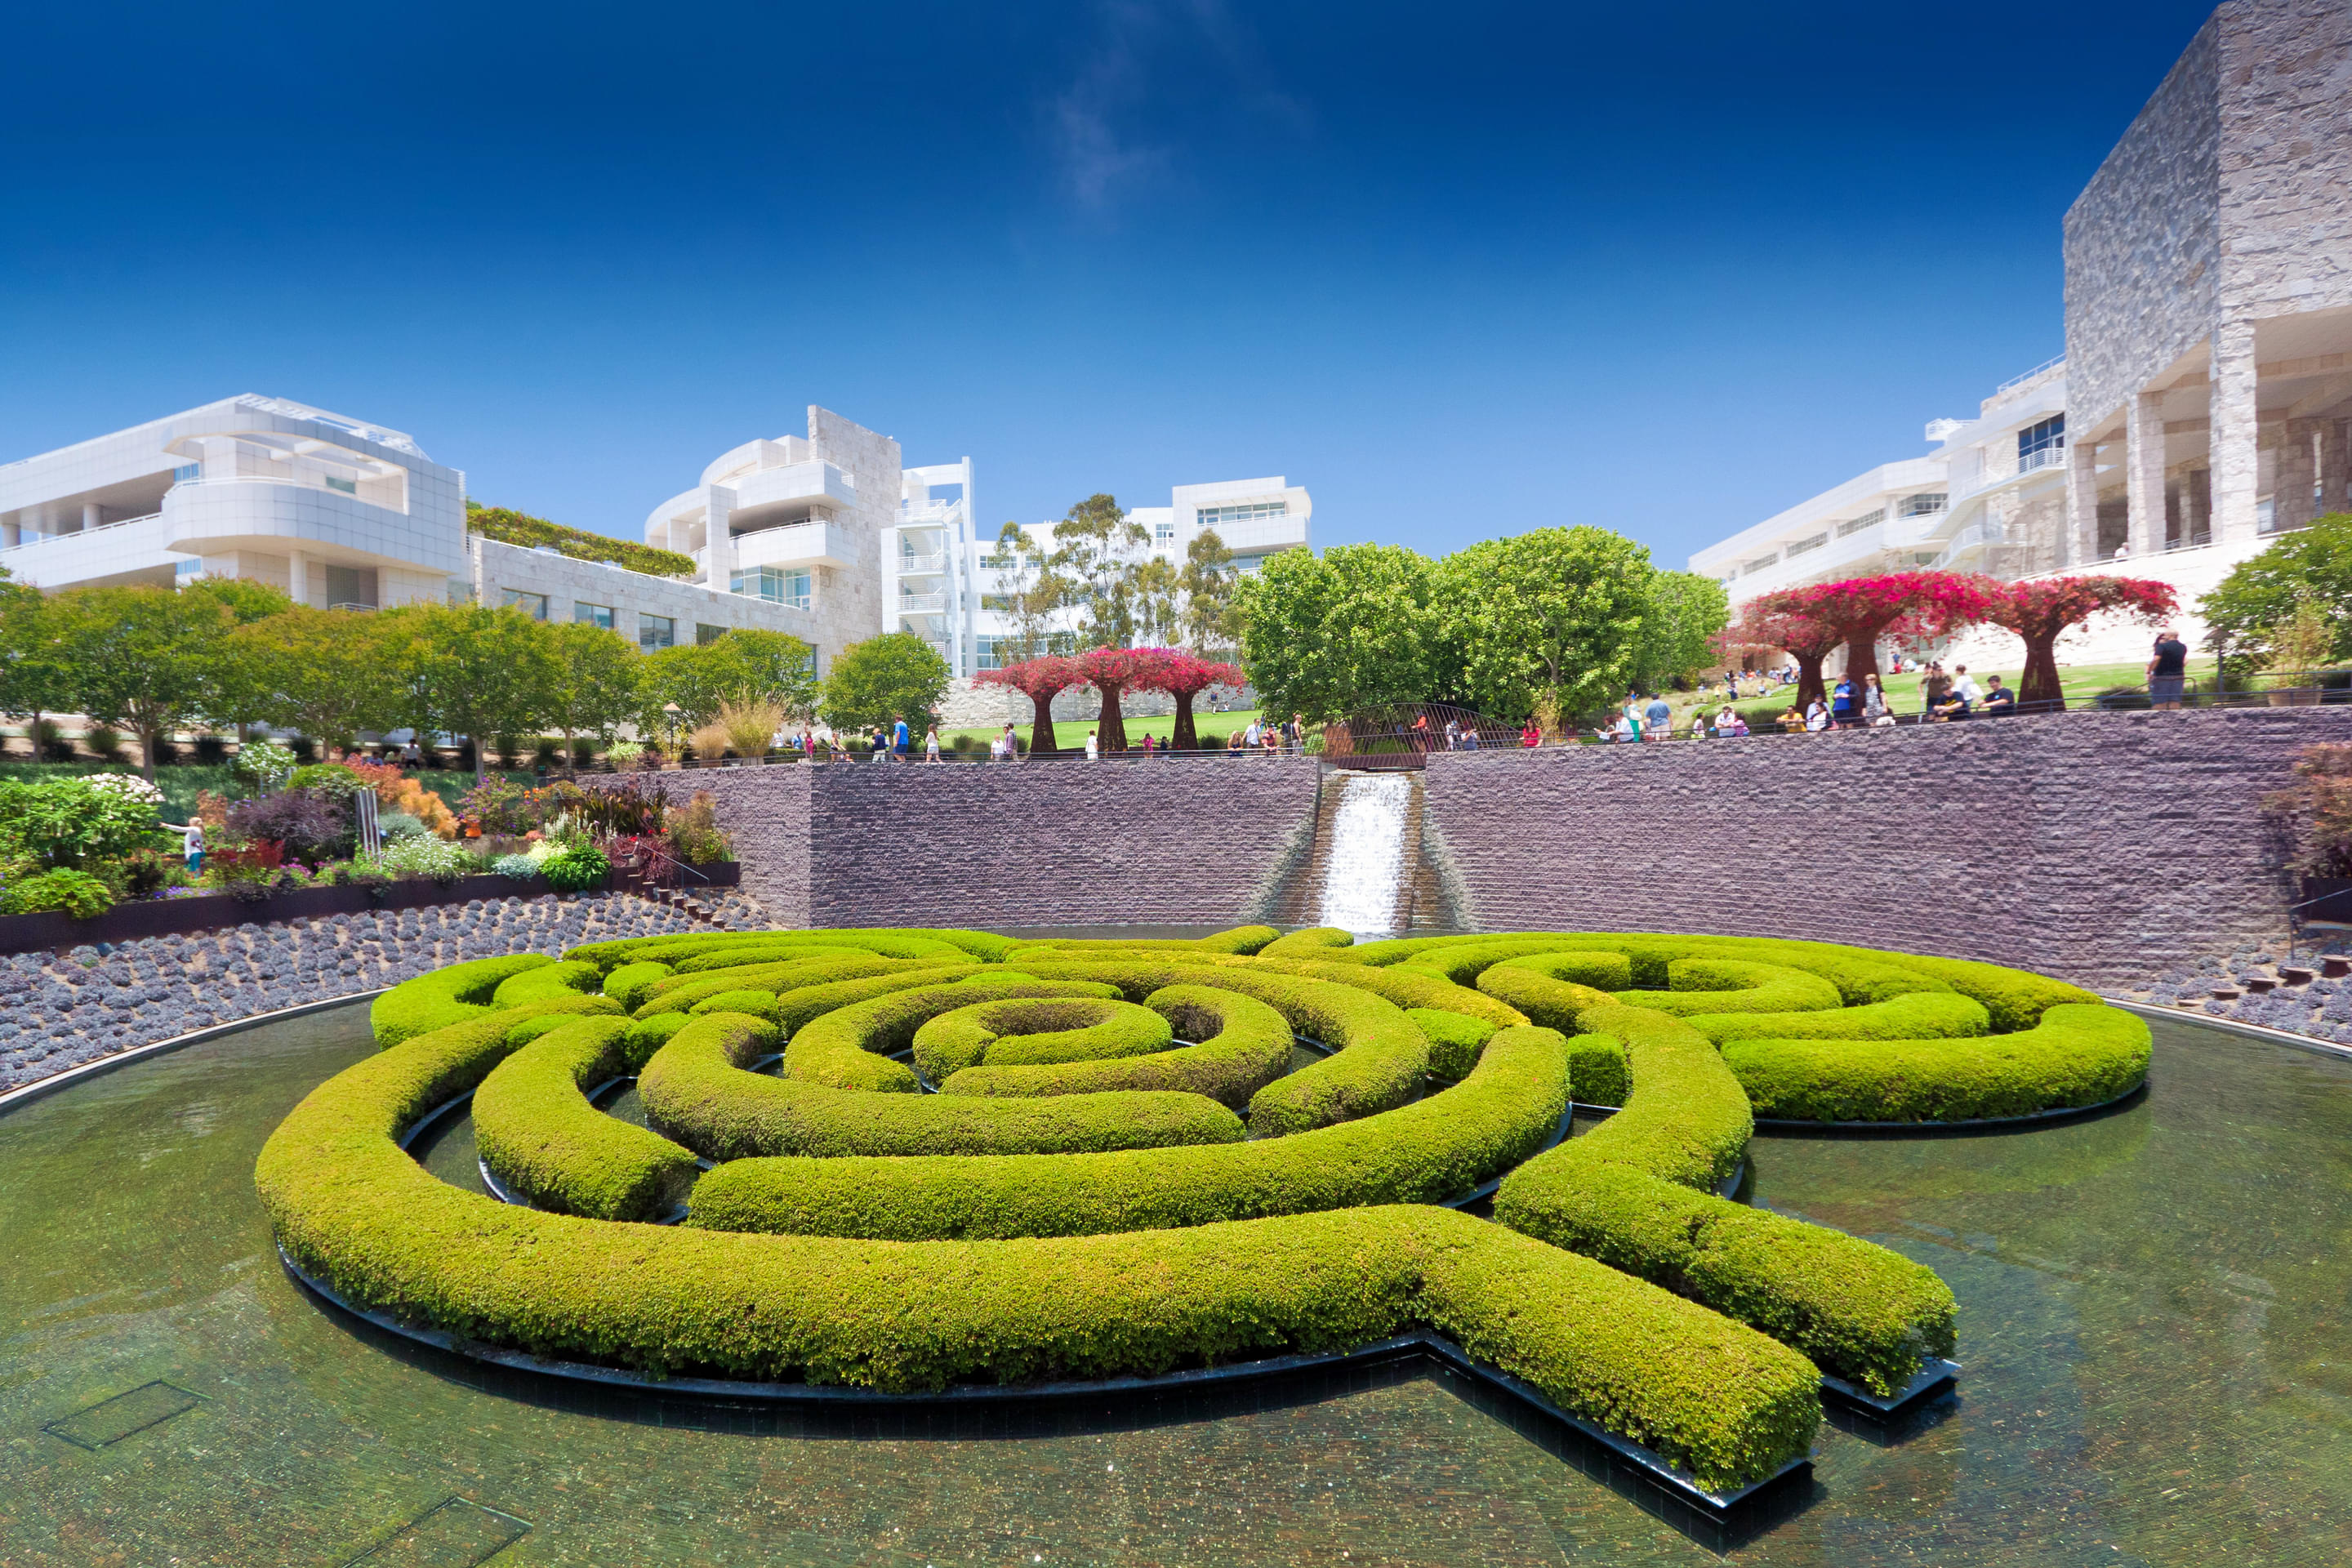 The Getty Center Overview